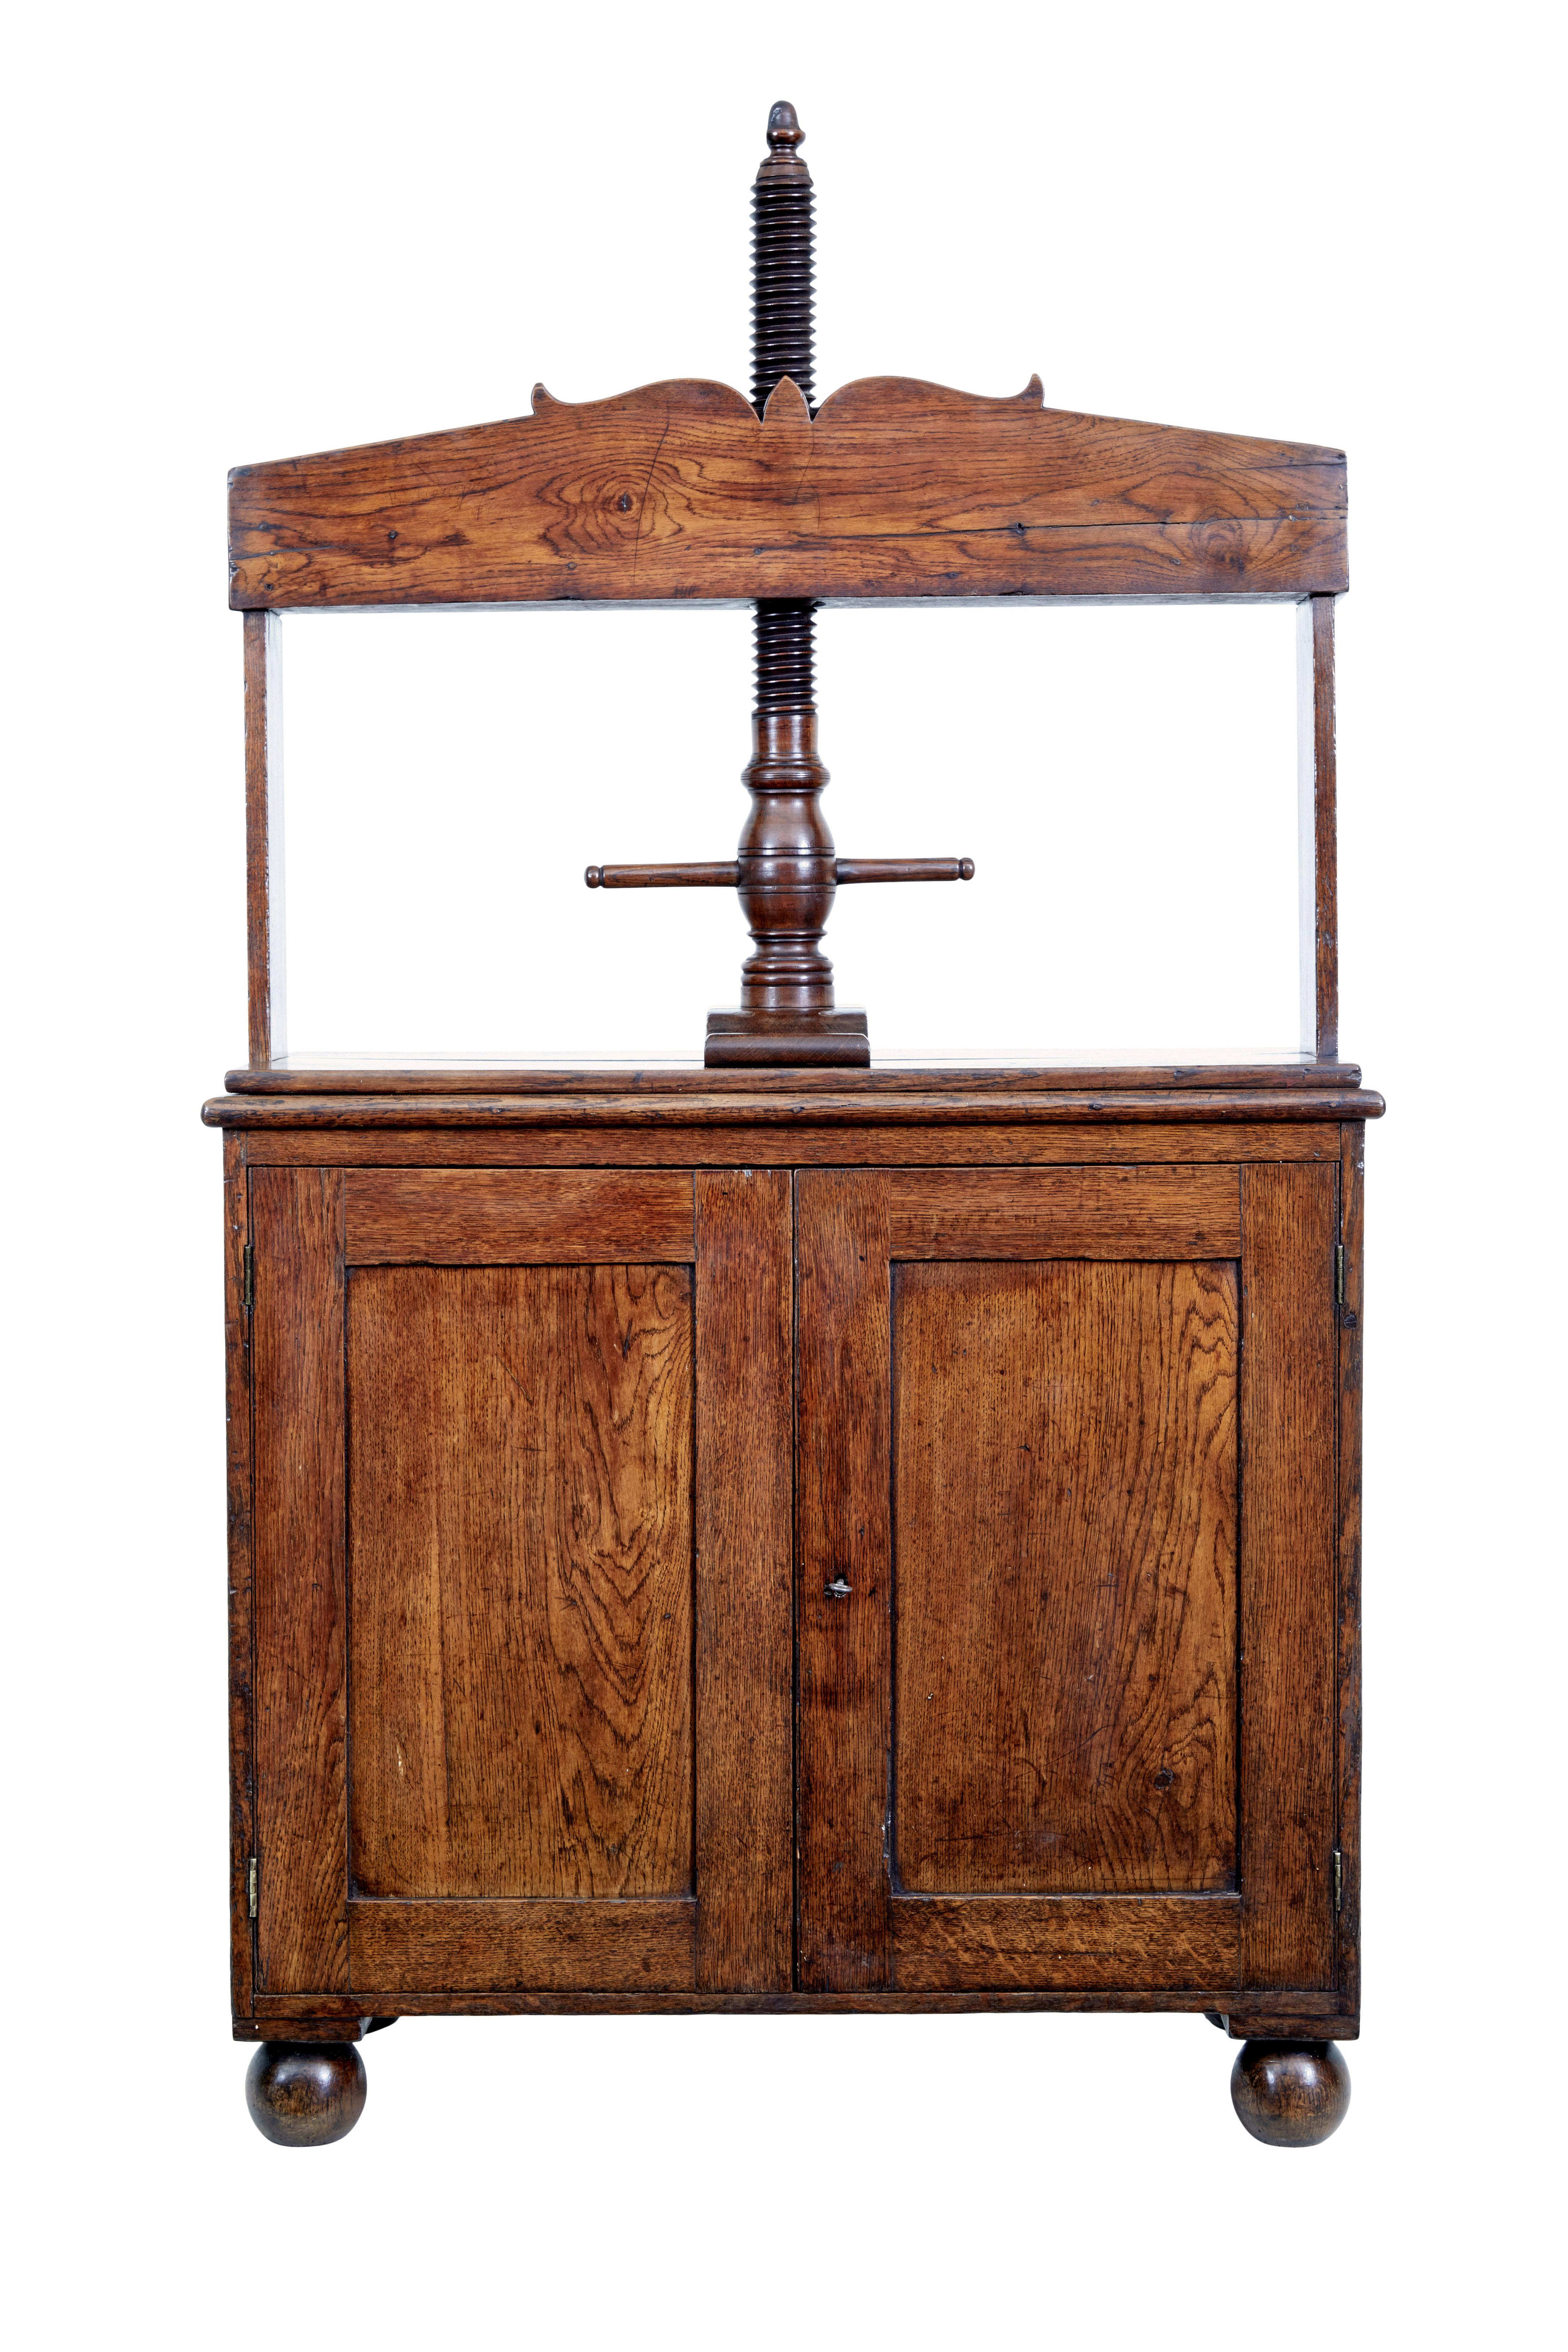 Early 19th century oak book press cupboard circa 1800.

One piece georgian book press made from solid oak.  Hand carved spiral thread which still functions well, turned by a turned arm.  Below which a double door cupboard with working lock and key,